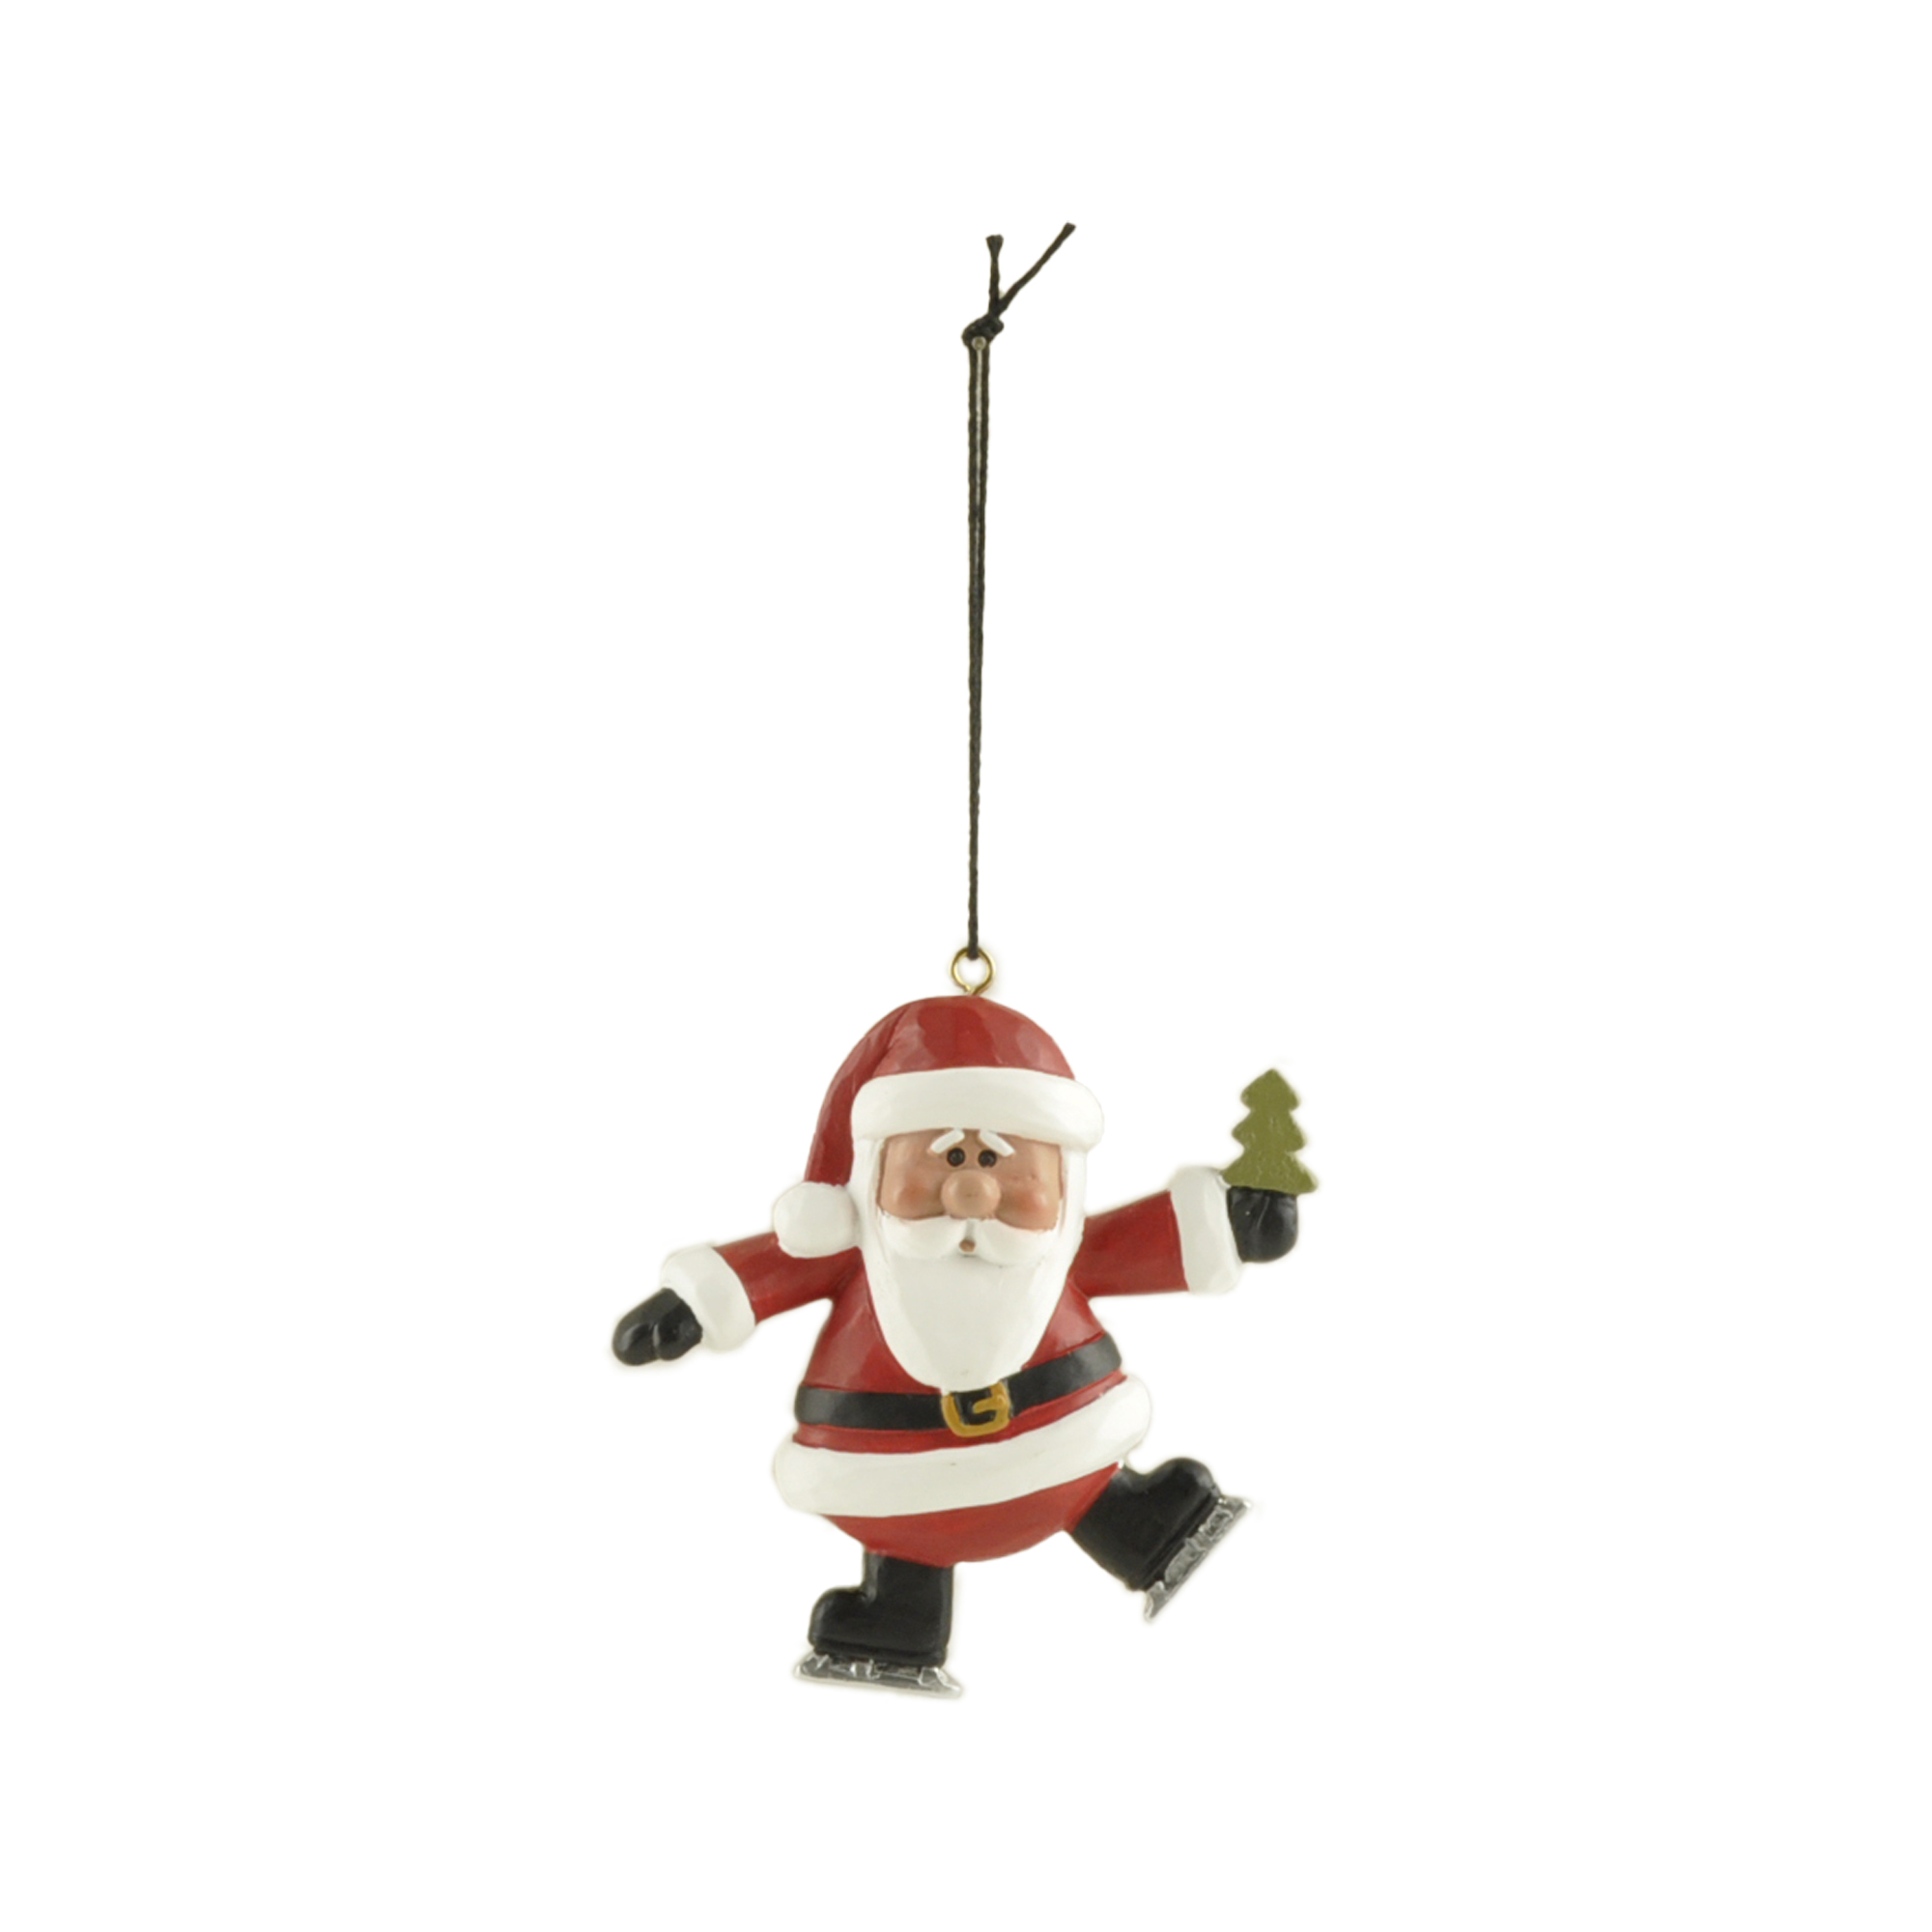 Joyful Resin Santa Claus Hanging Ornament with Christmas Tree – Enchanting Holiday Decor for a Festive Atmosphere 238-52146